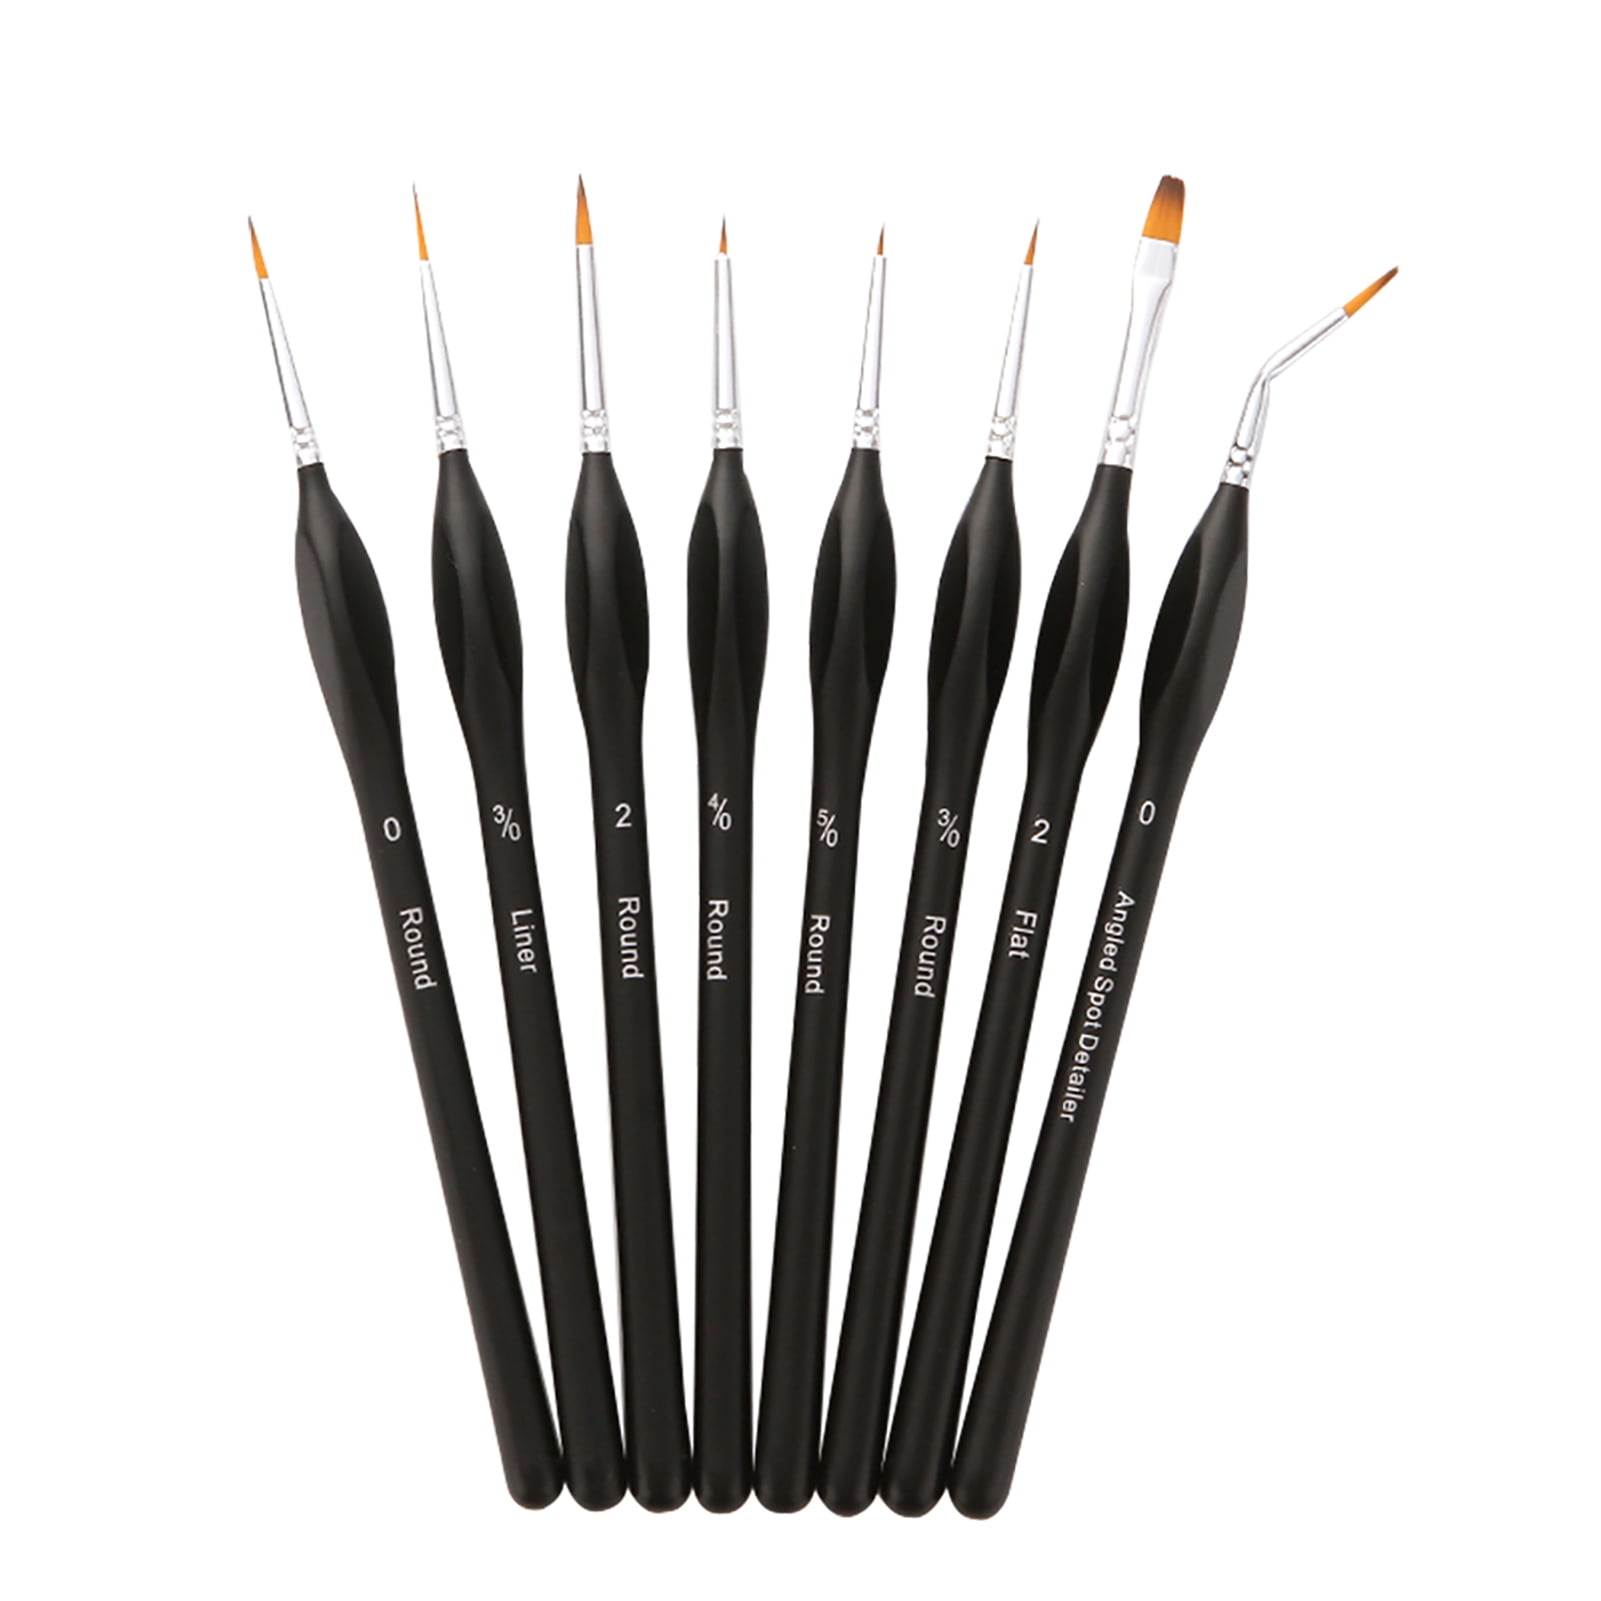 Paint by Numbers Art Supplies Kit 15PCS Miniature Paint Brushes,Tiny Professional Micro Miniature Painting Brushes Kit with Ergonomic Handle for Acrylic Watercolor Oil 